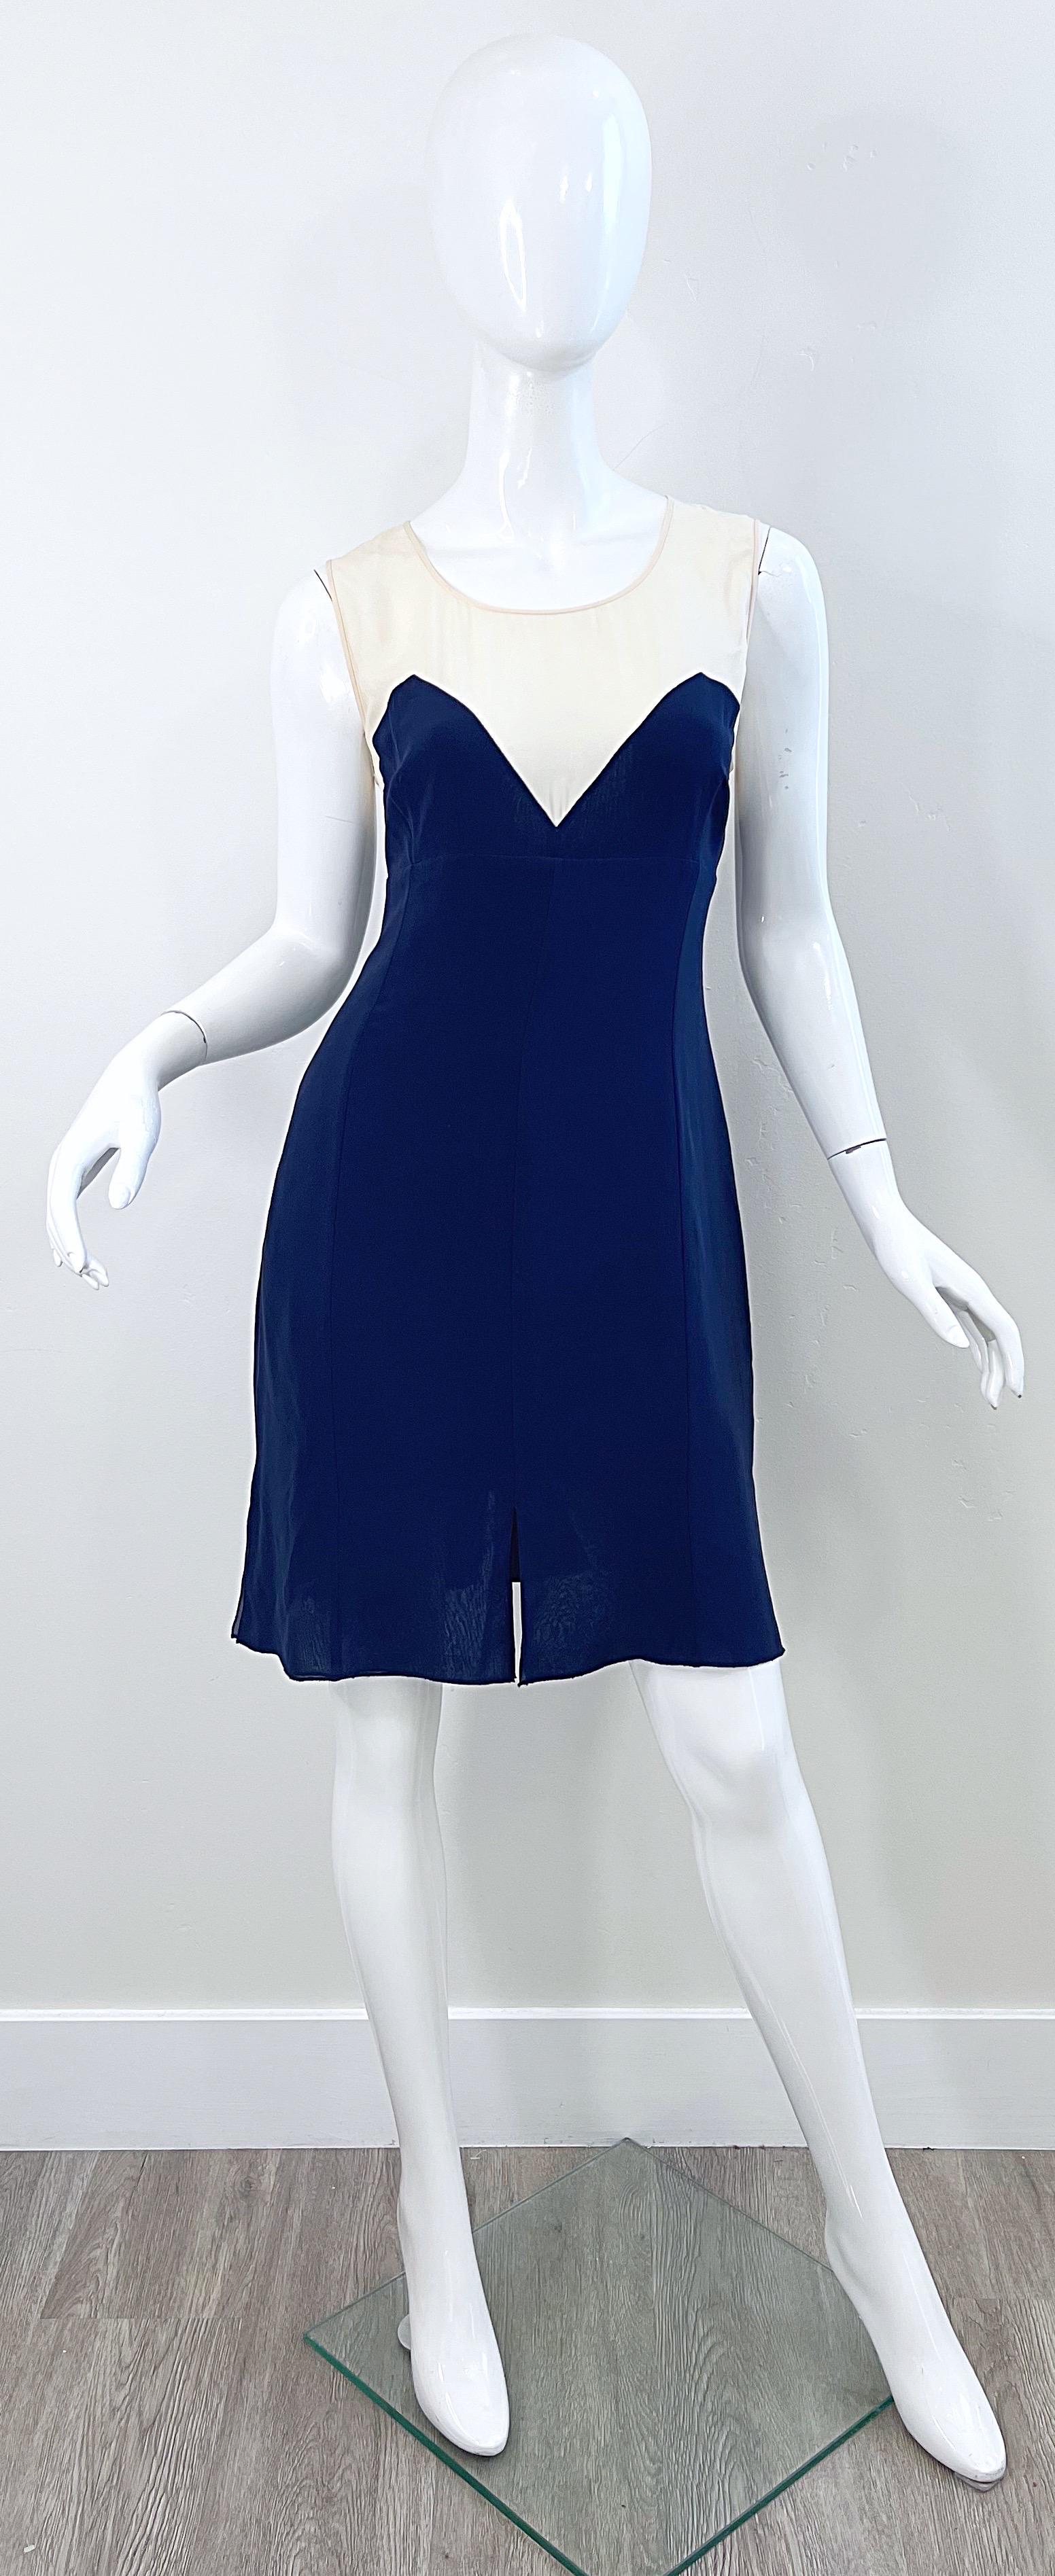 Beautiful late 80s KARL LAGERFELD navy + ivory silk chiffon sleeveless dress. Features a navy body with semi sheer ivory above the bust. Hidden zipper up the back with hook-and-eye closure. Button closure at top back neck. Multiple layers of chiffon